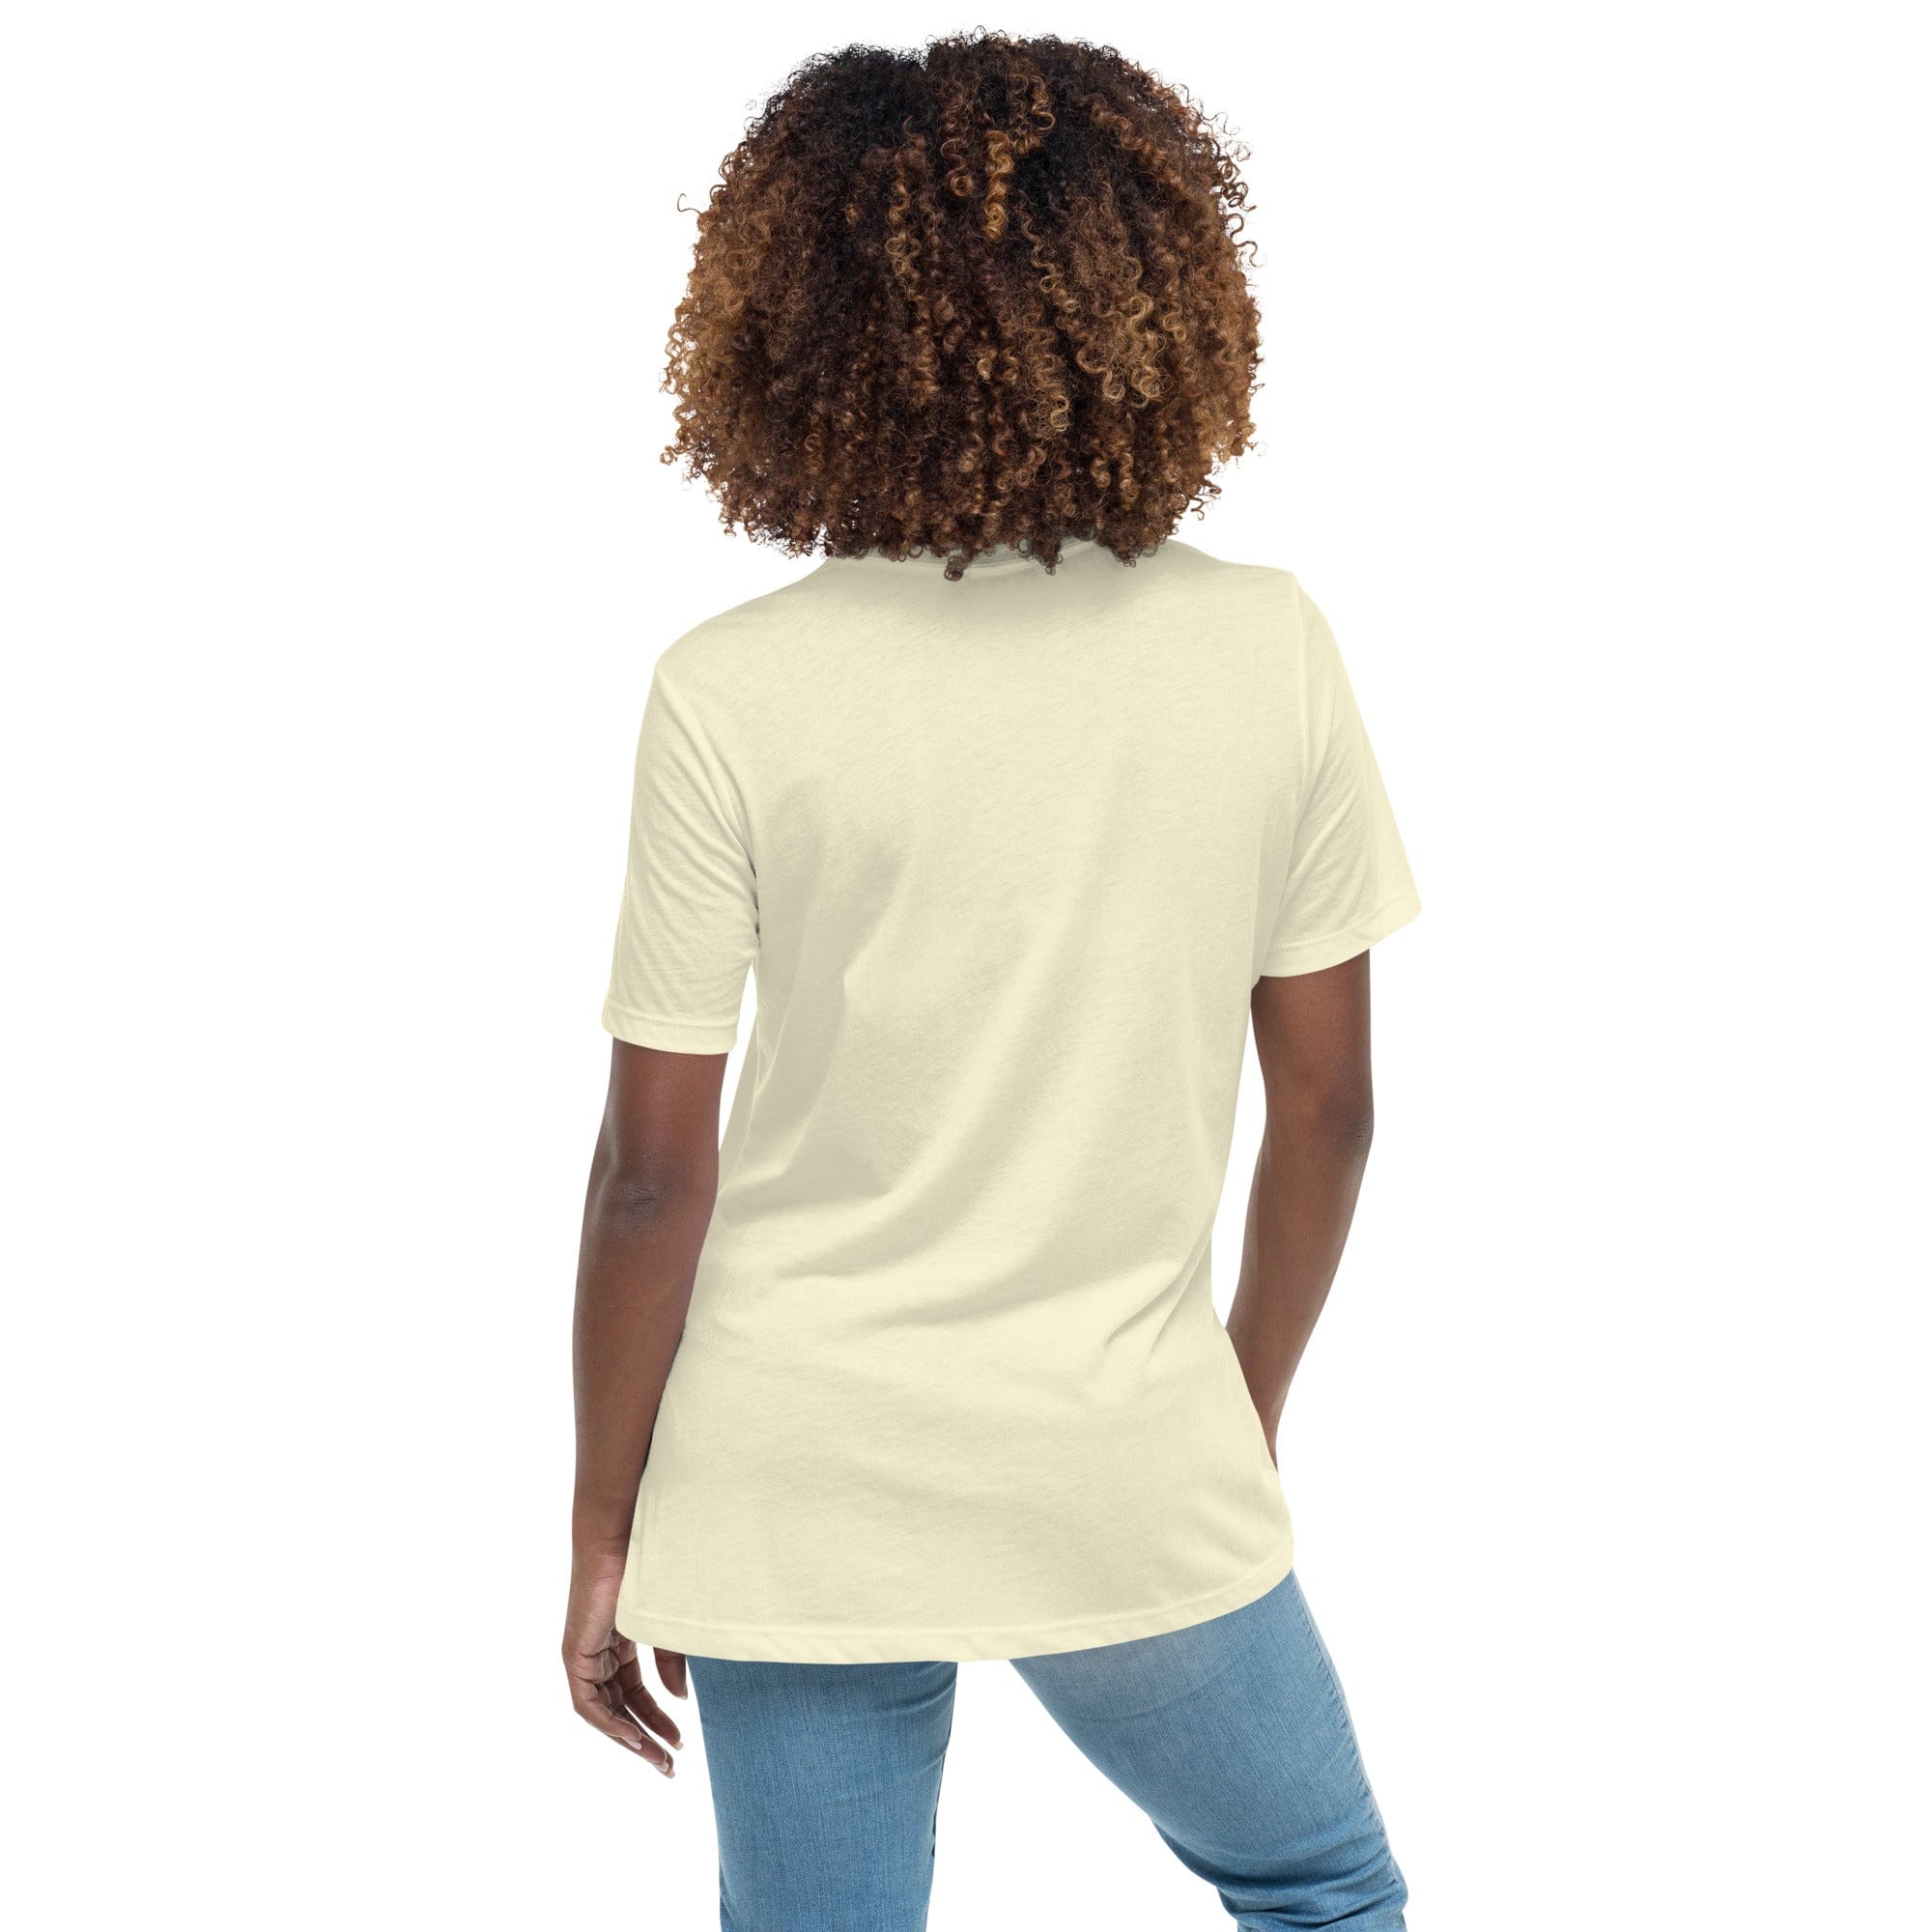 Spruced Roost Gardner Lady - Women's Relaxed T-Shirt - S-3XL